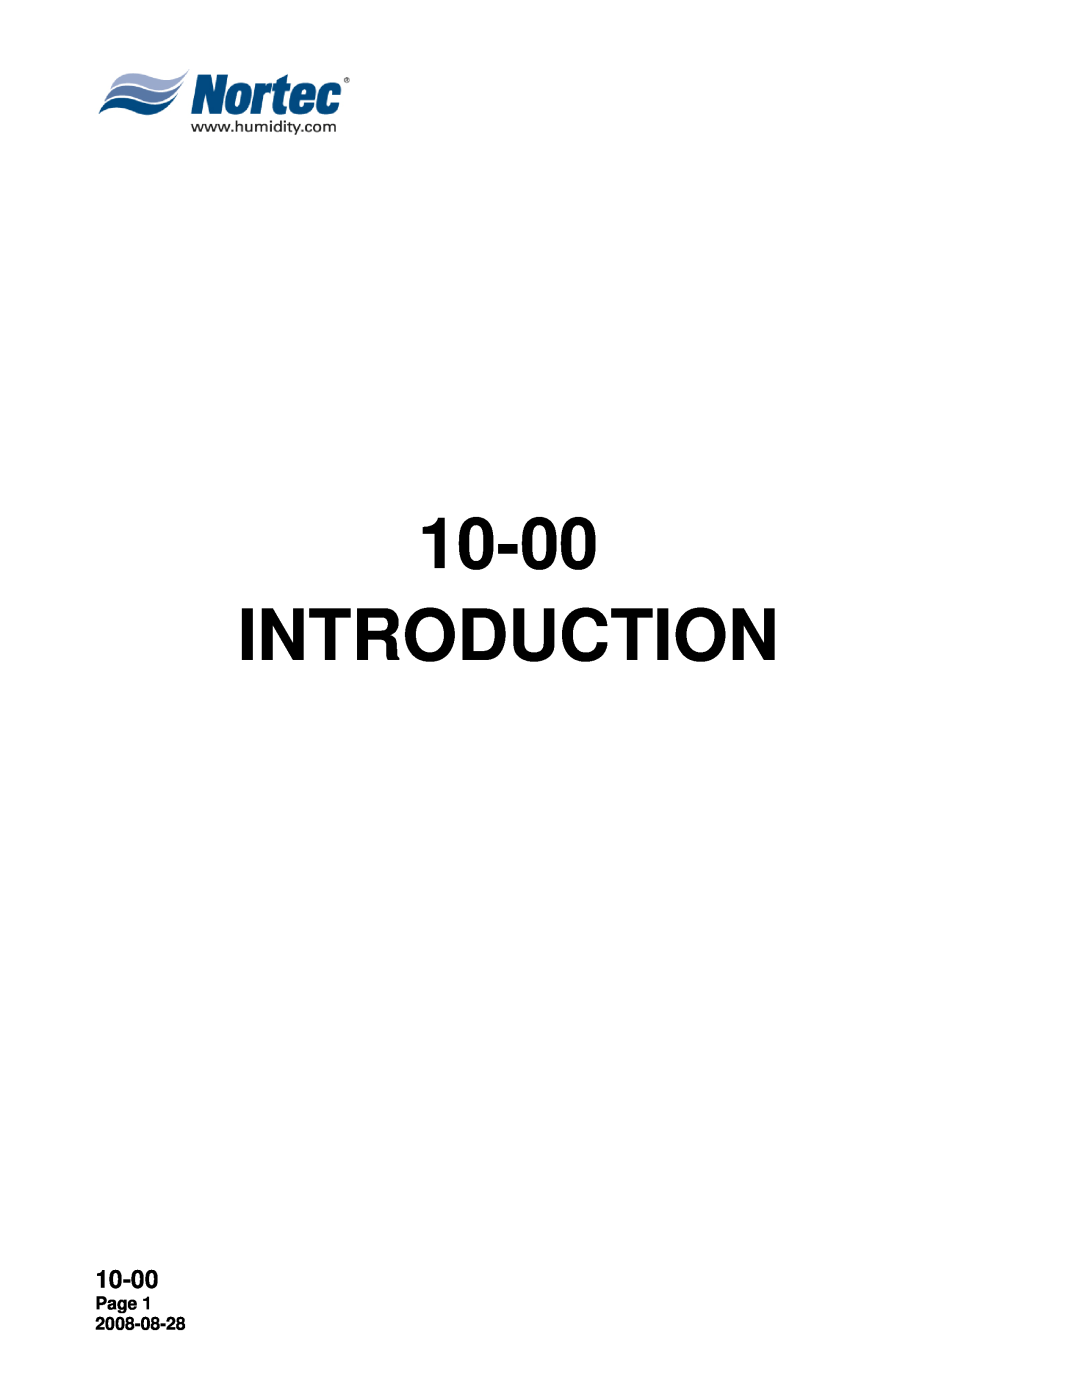 Nortec NH Series installation manual Introduction, 10-00, Page 1 